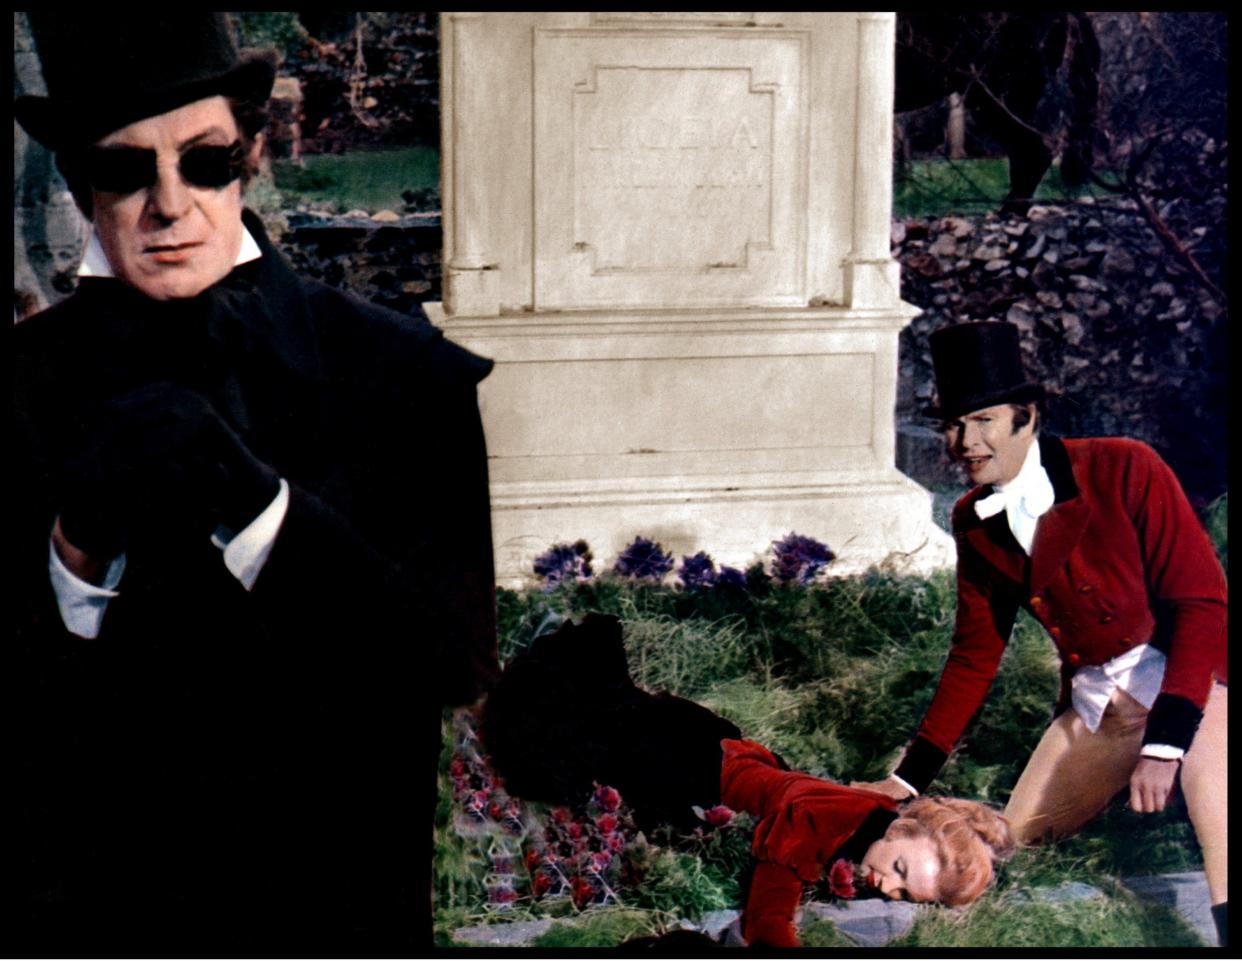 Roger Corman's 1965 Poe adaptation The Tomb of Ligeia, scripted by Towne